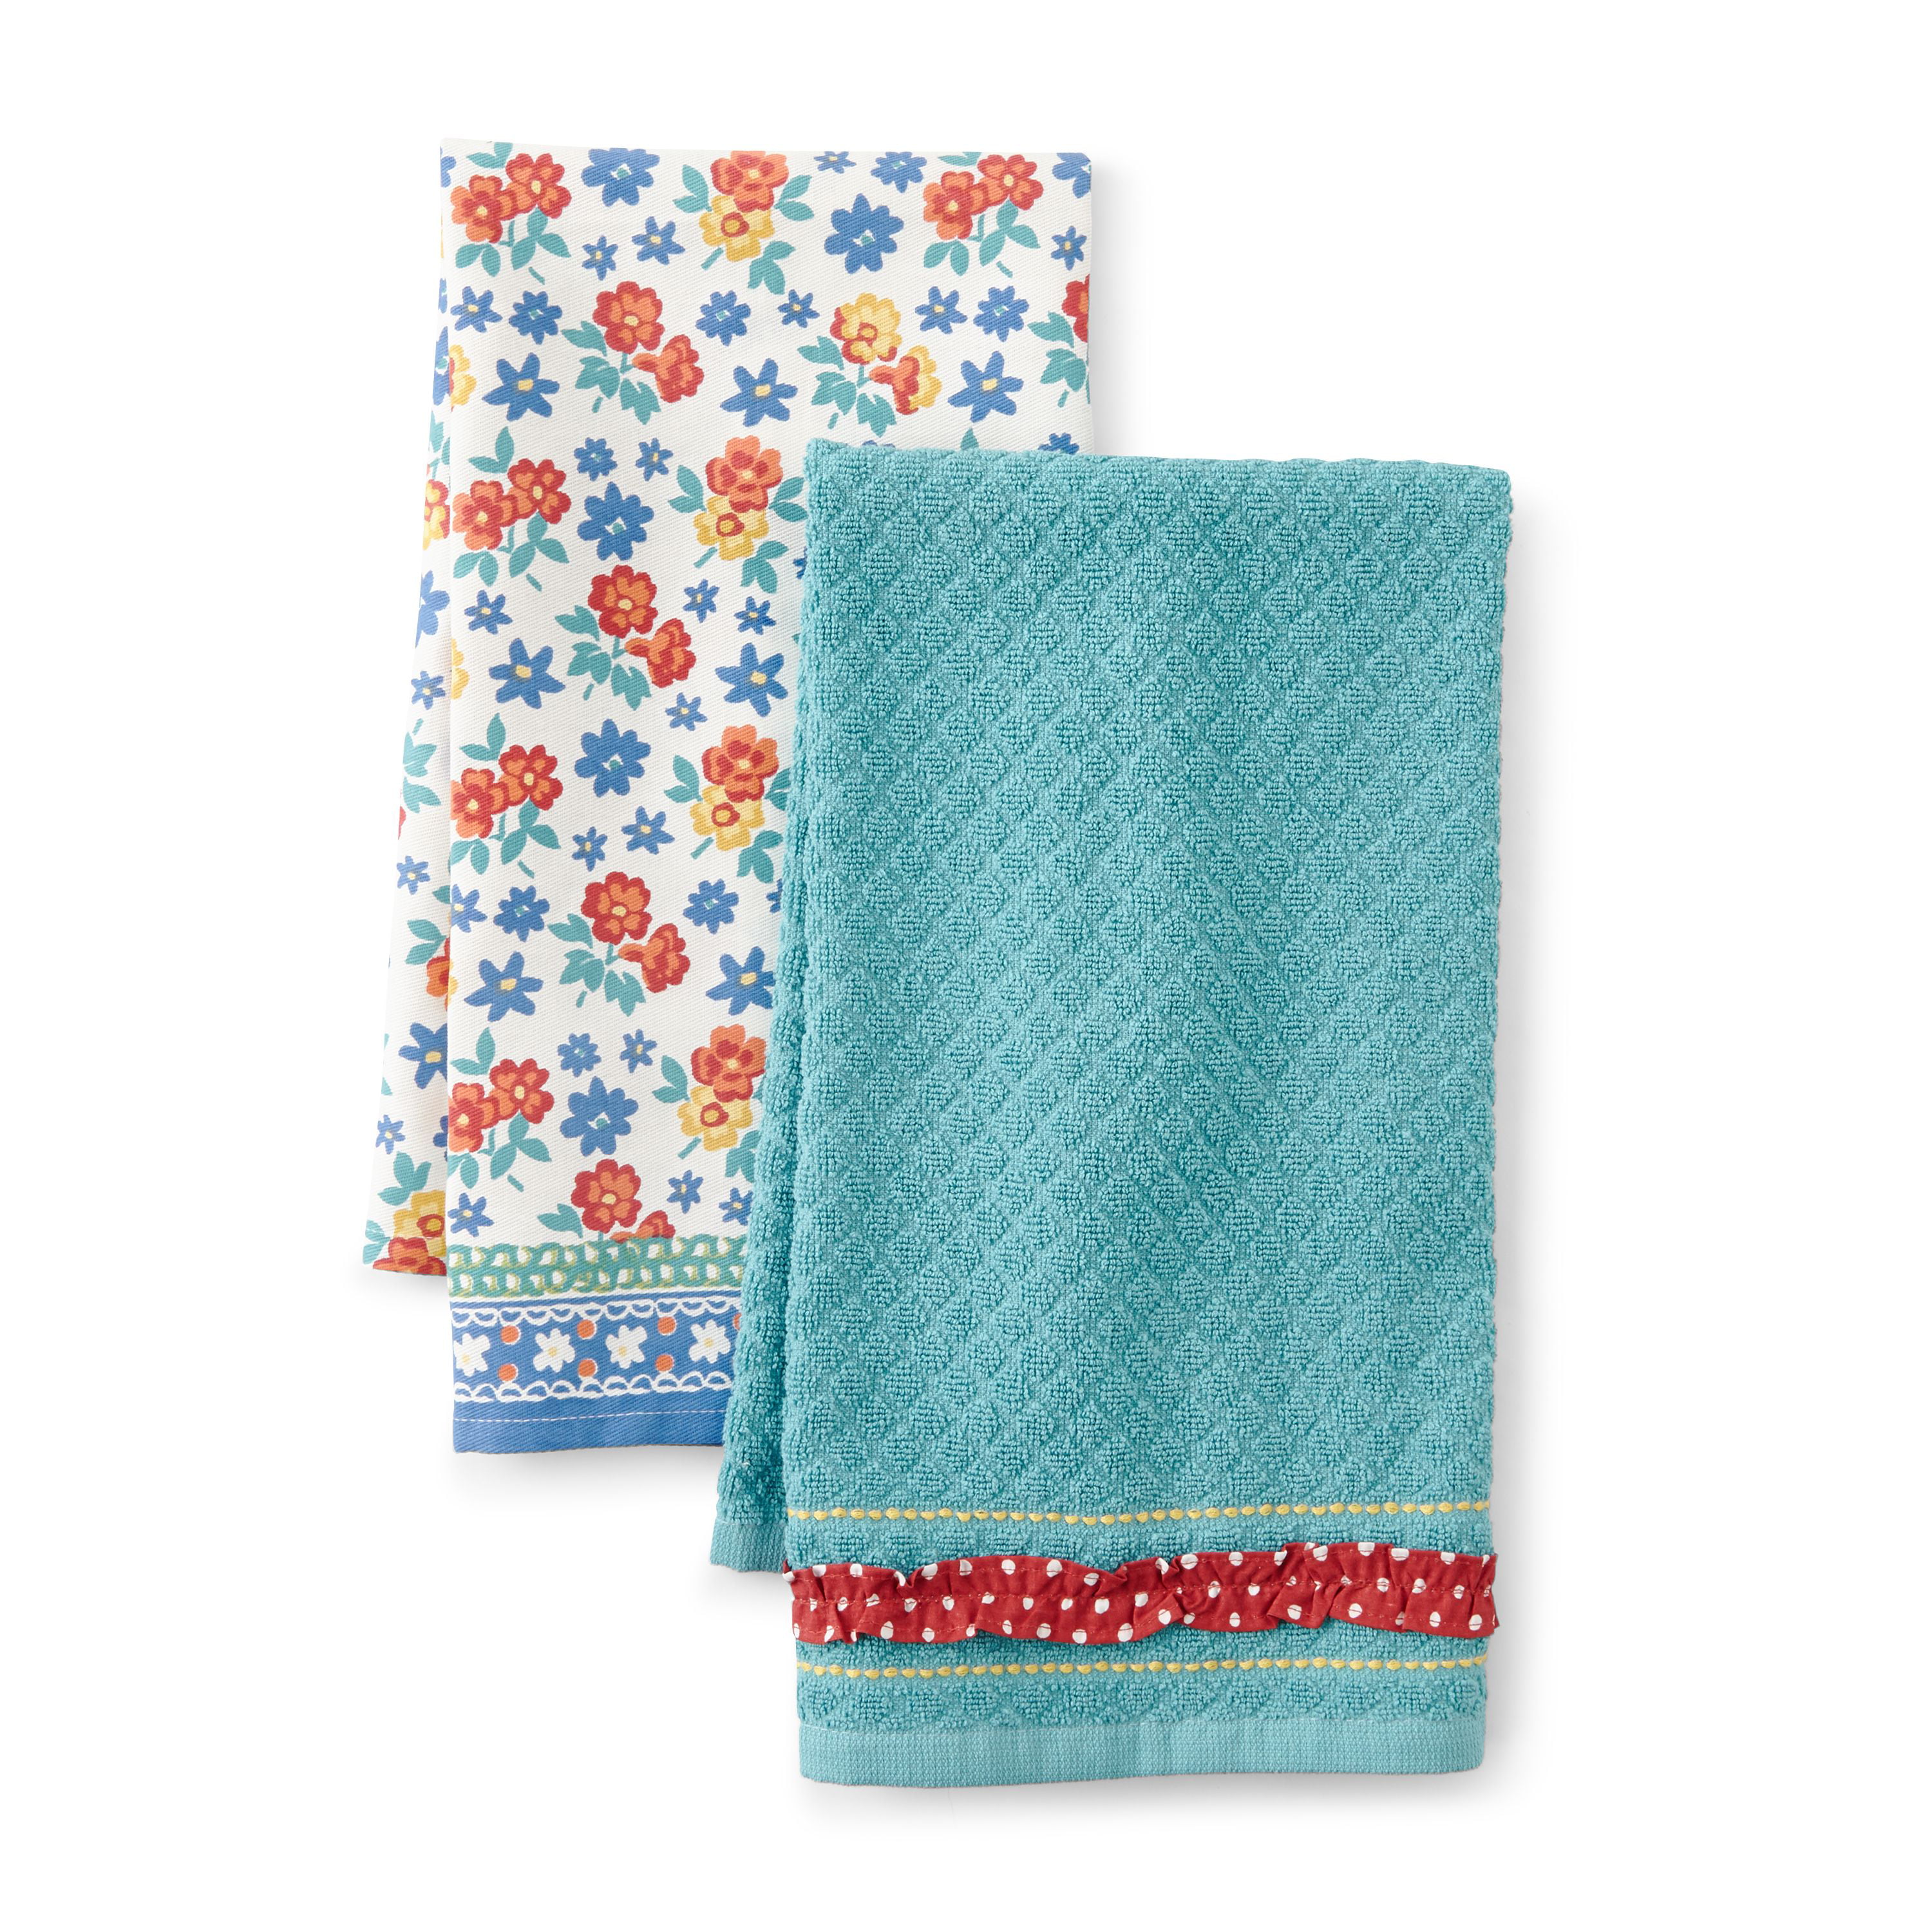 The Pioneer Woman Gorgeous Garden Kitchen Towels, 4 Pack